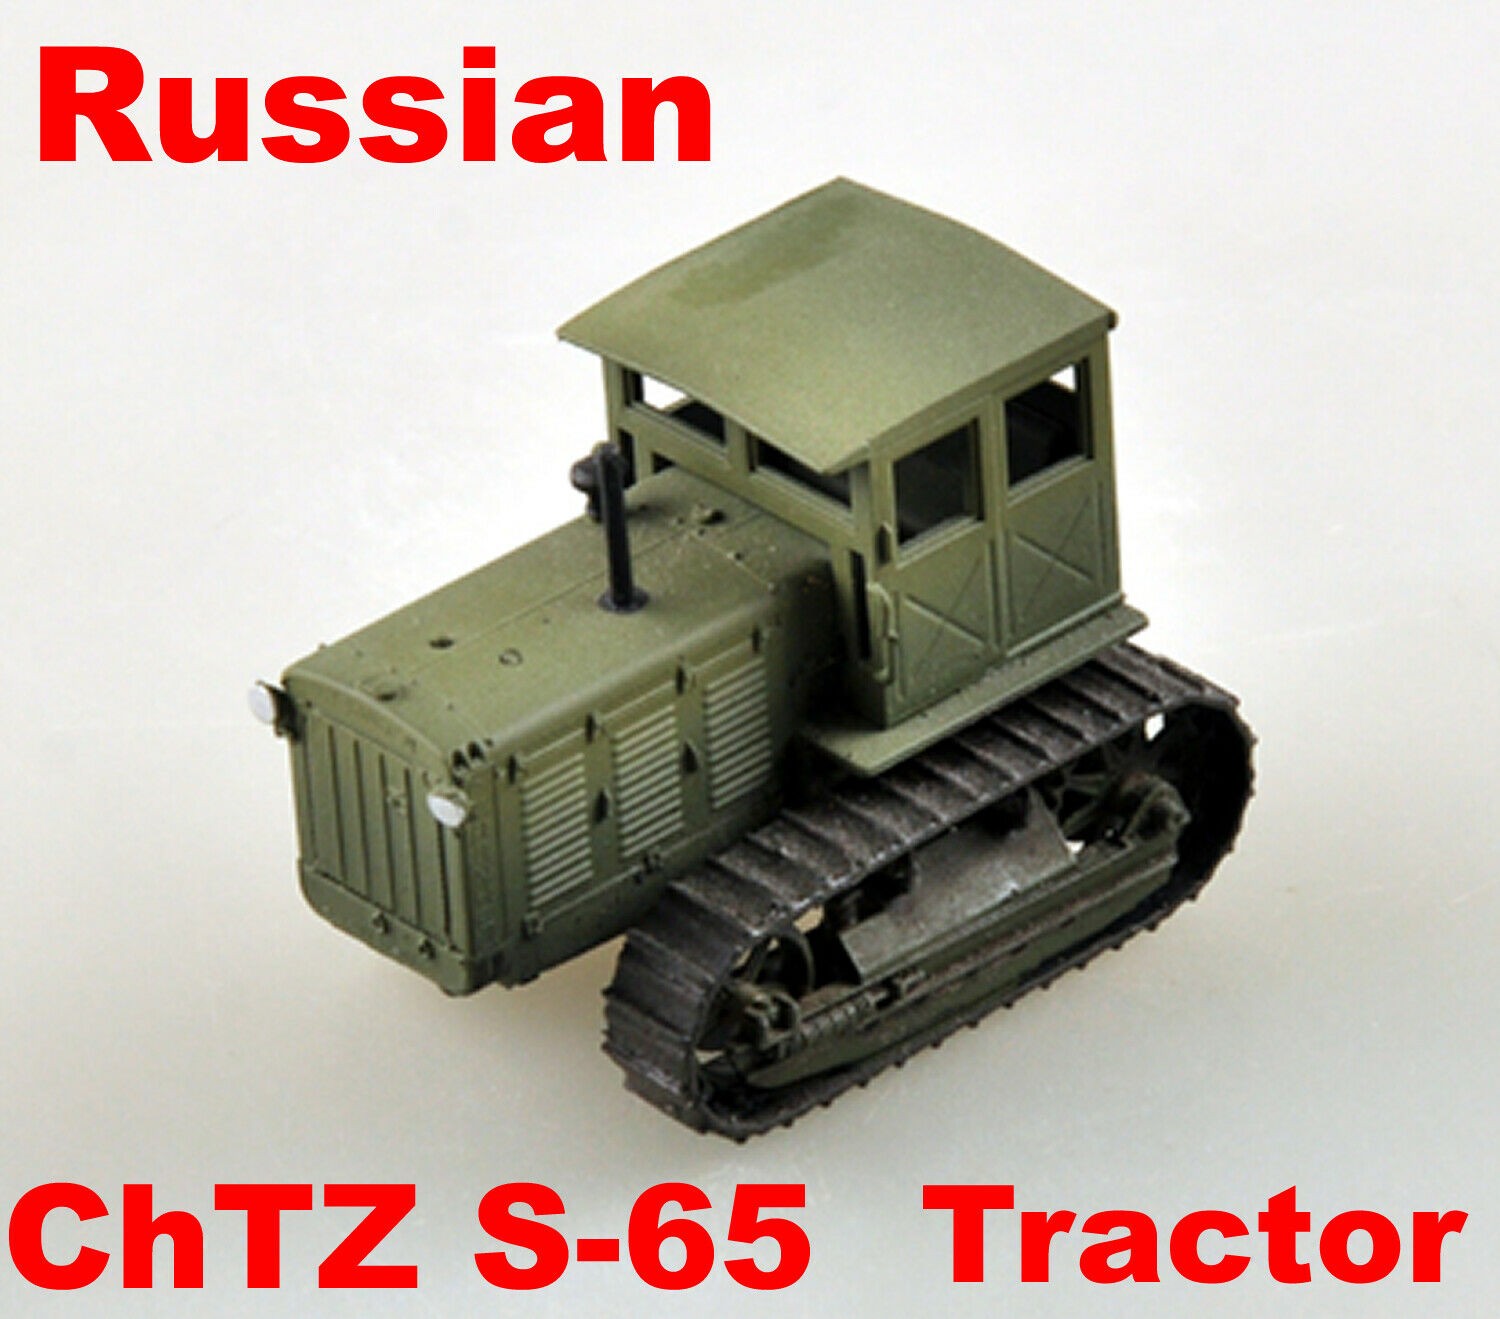 Easy Model 35114 Russian ChTZ S-65 Tractor 1:72